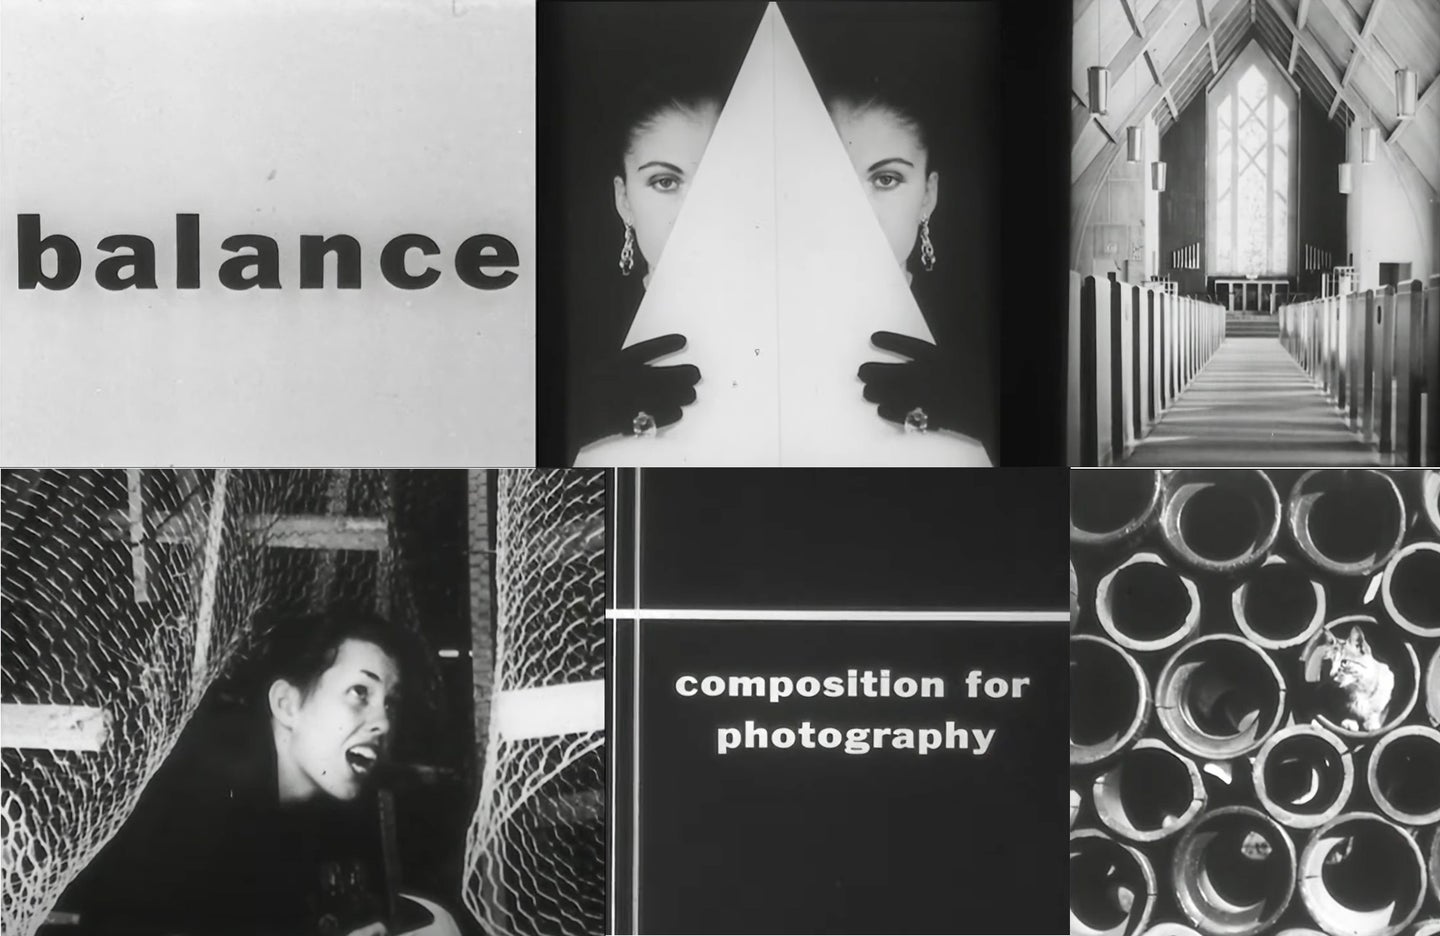 1949 composition photography video screenshots.